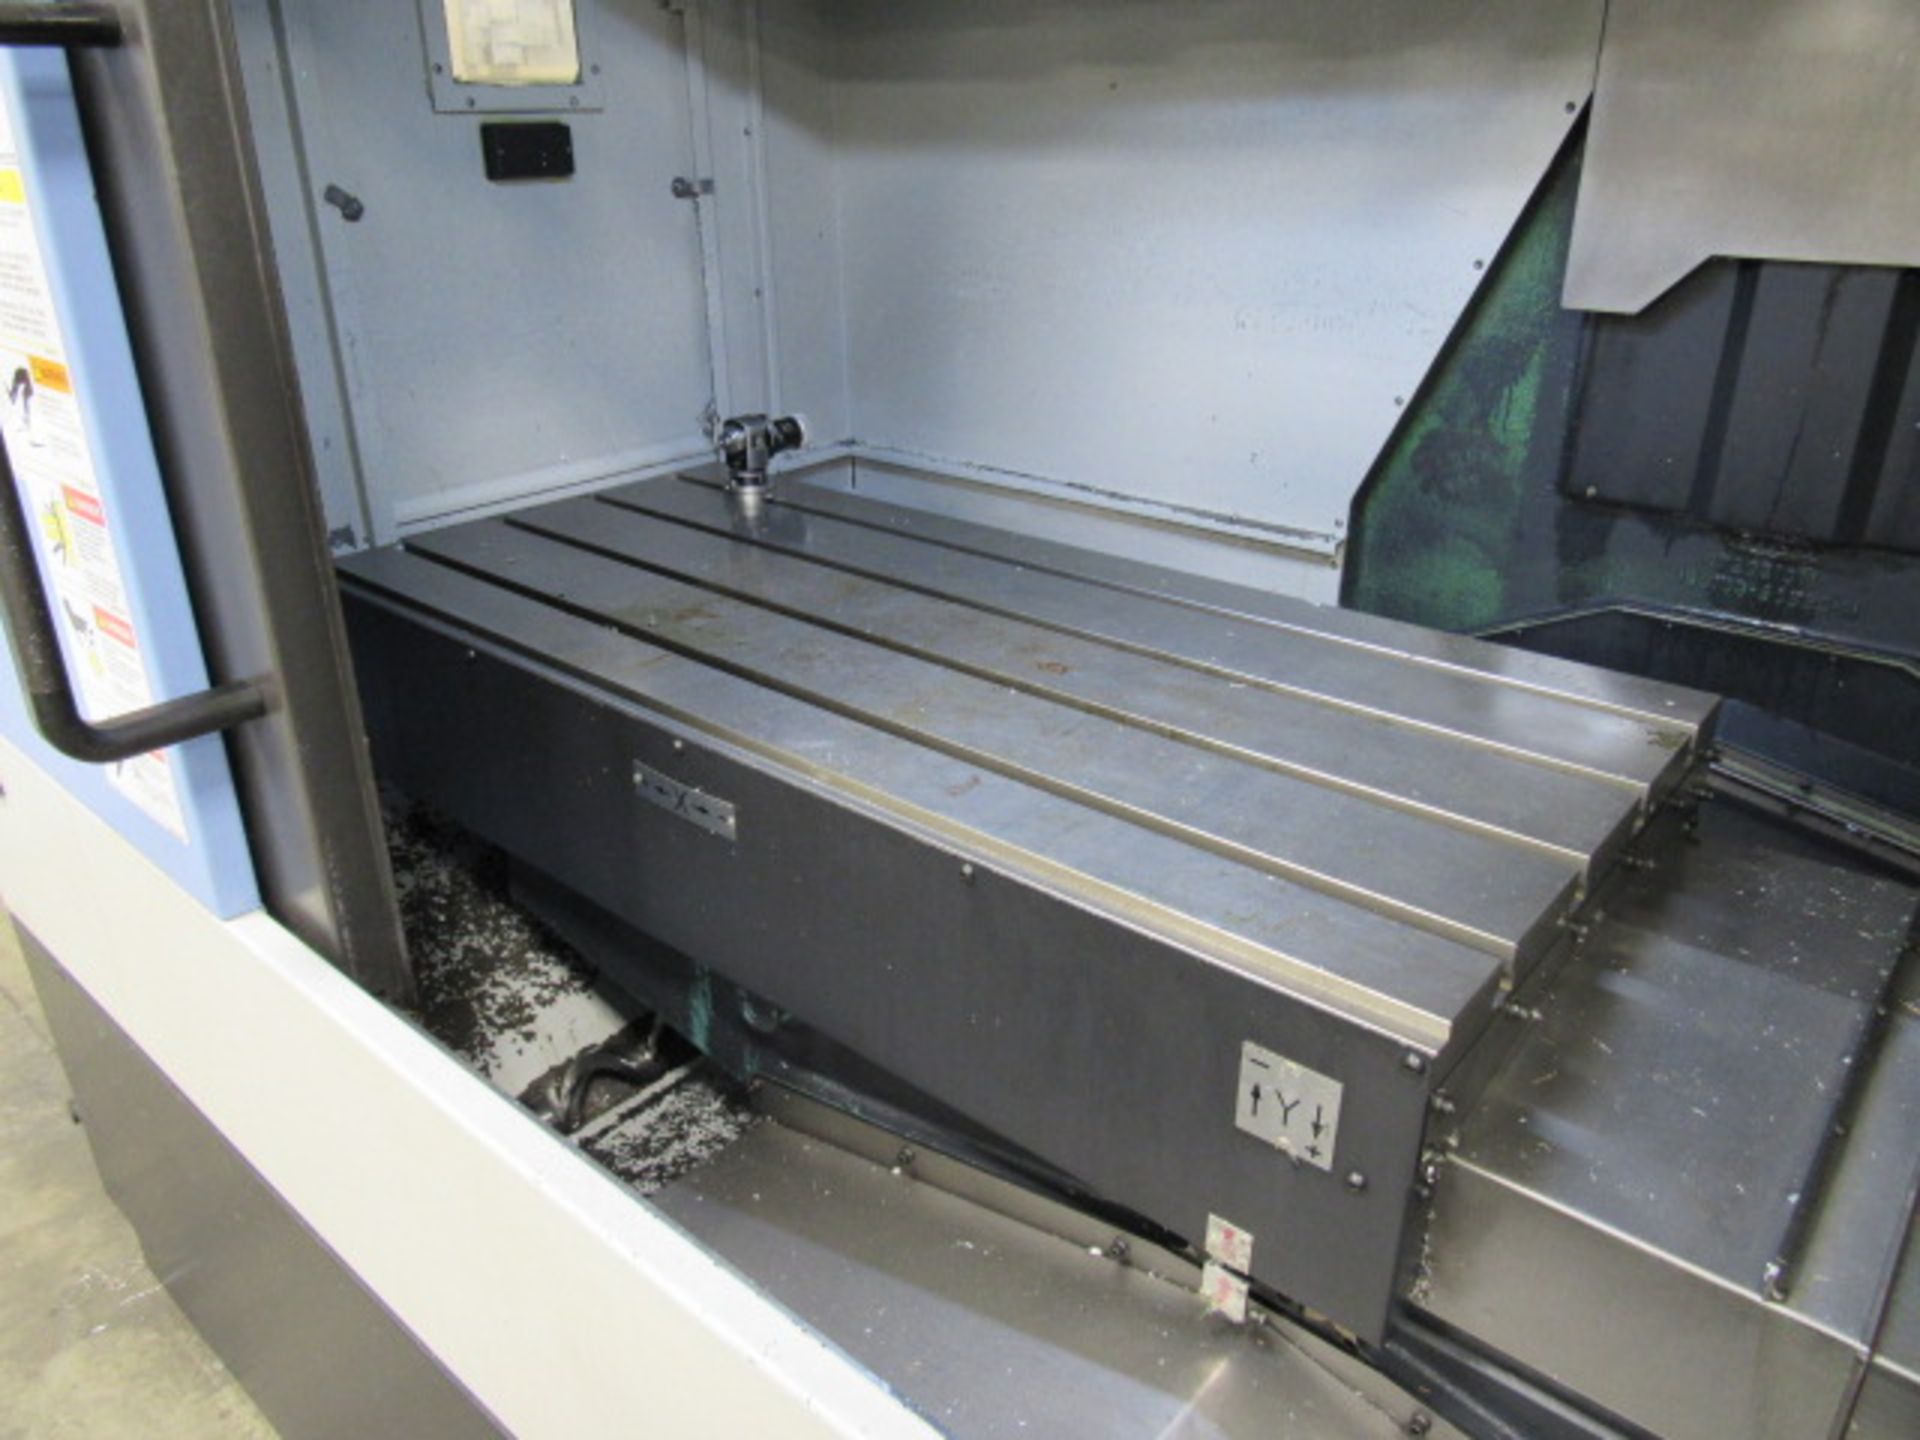 Doosan DNM 500 II CNC Vertical Machining Centers with 47.2'' x 21.2'' Tables, Big Plus #40, - Image 3 of 9